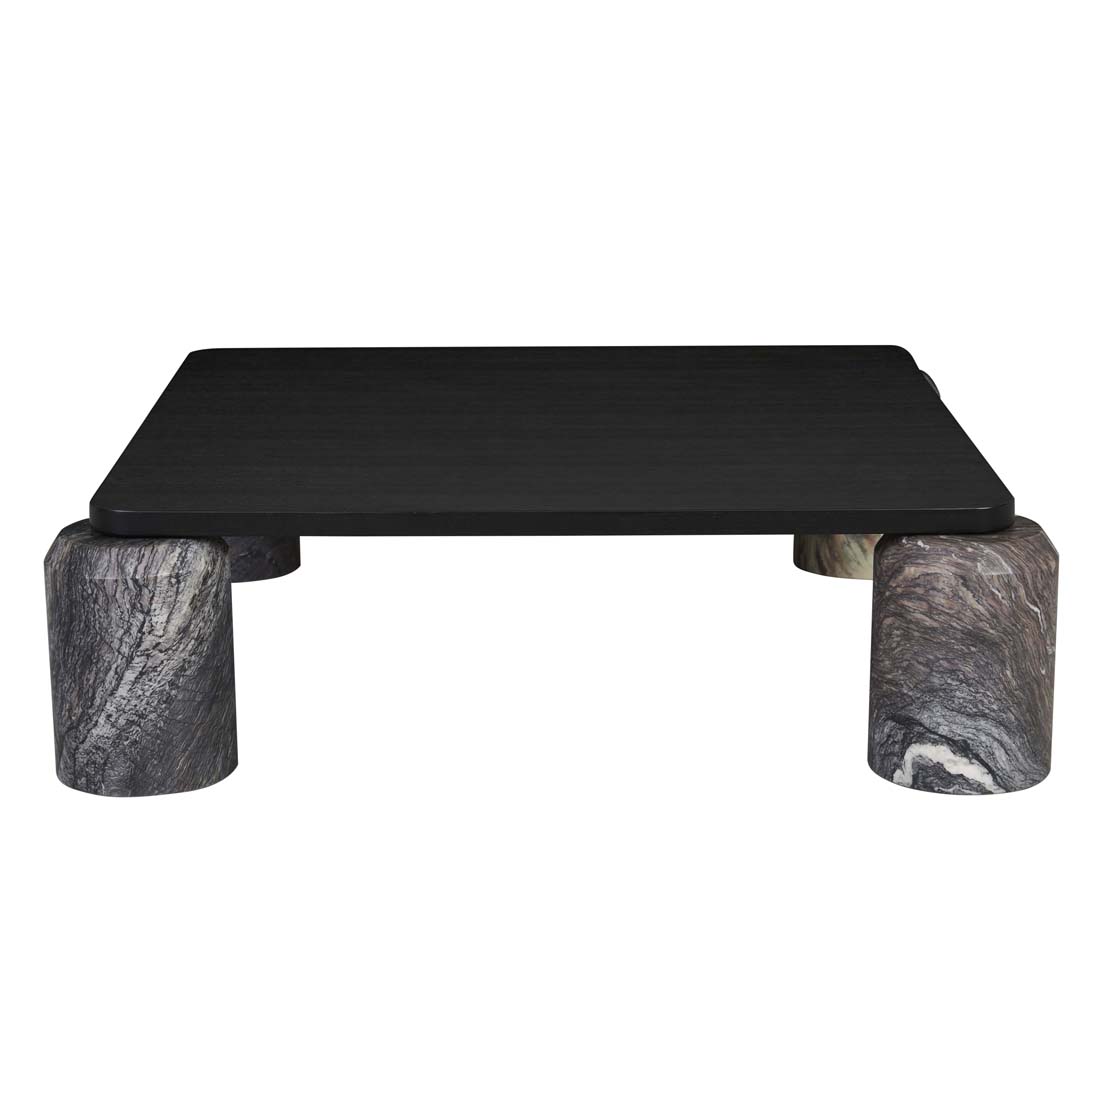 Pablo Marble Coffee Table image 16